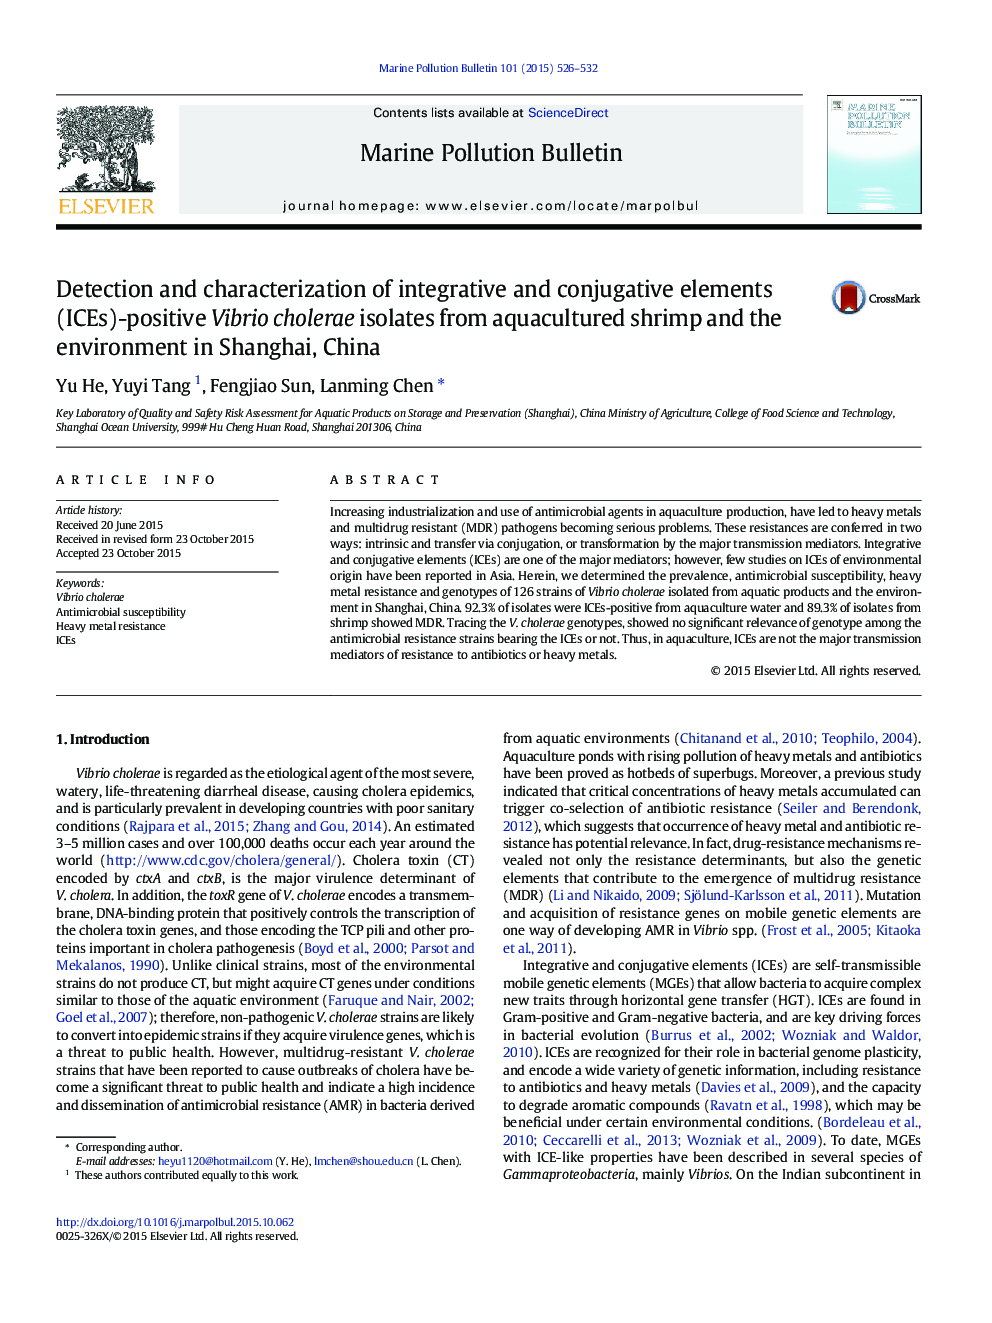 Detection and characterization of integrative and conjugative elements (ICEs)-positive Vibrio cholerae isolates from aquacultured shrimp and the environment in Shanghai, China